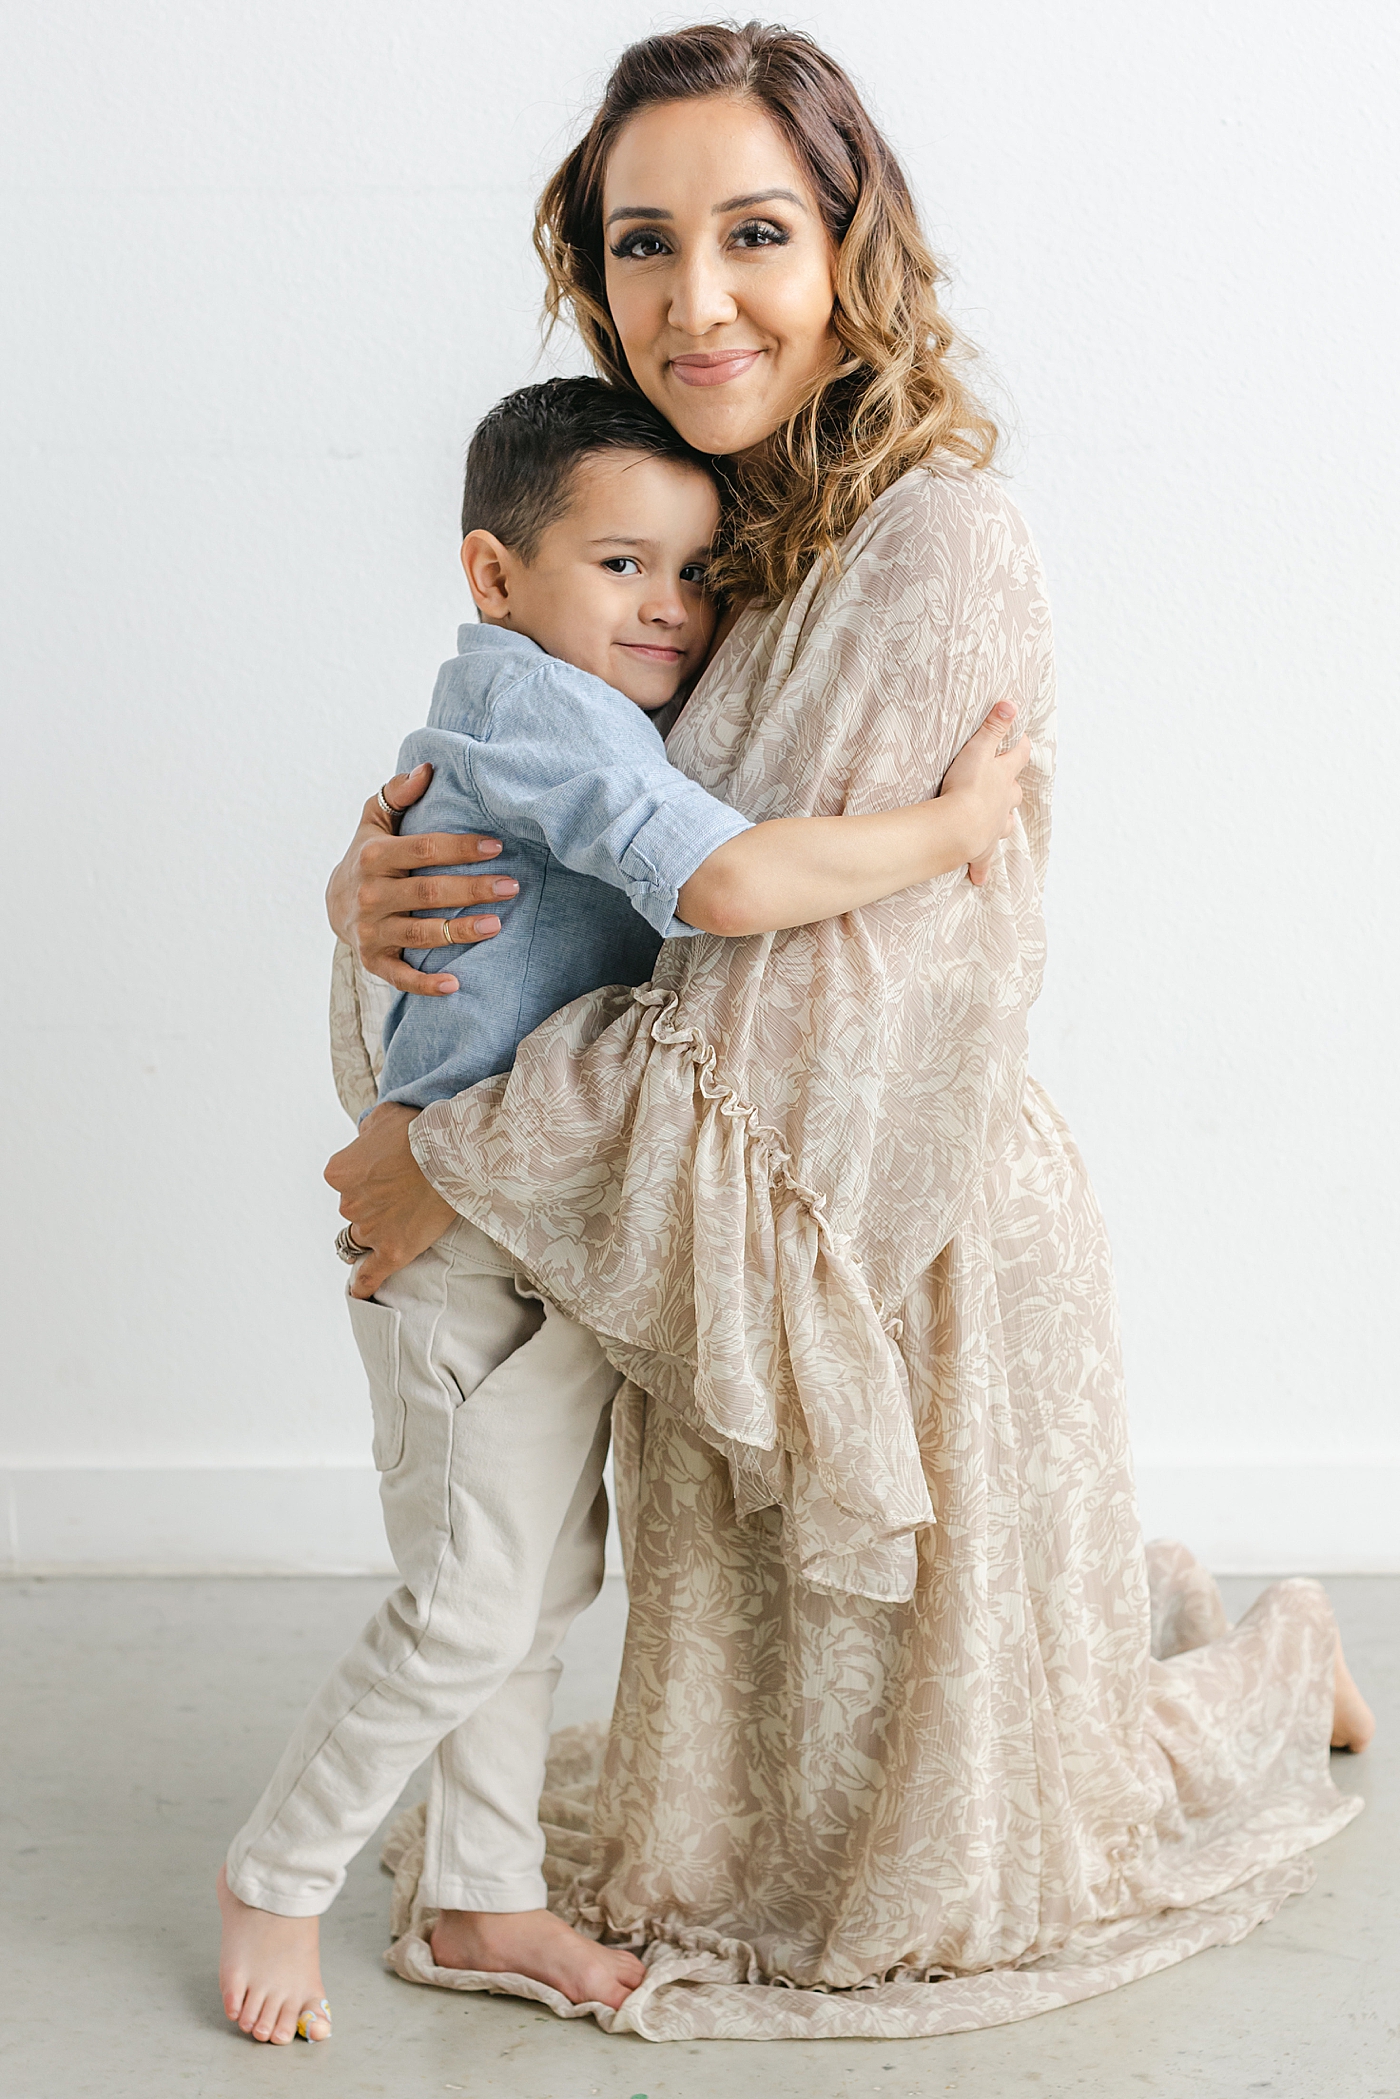 Mom snuggling with her youngest son during their Studio Family Session in Austin | Photo by Sana Ahmed Photography